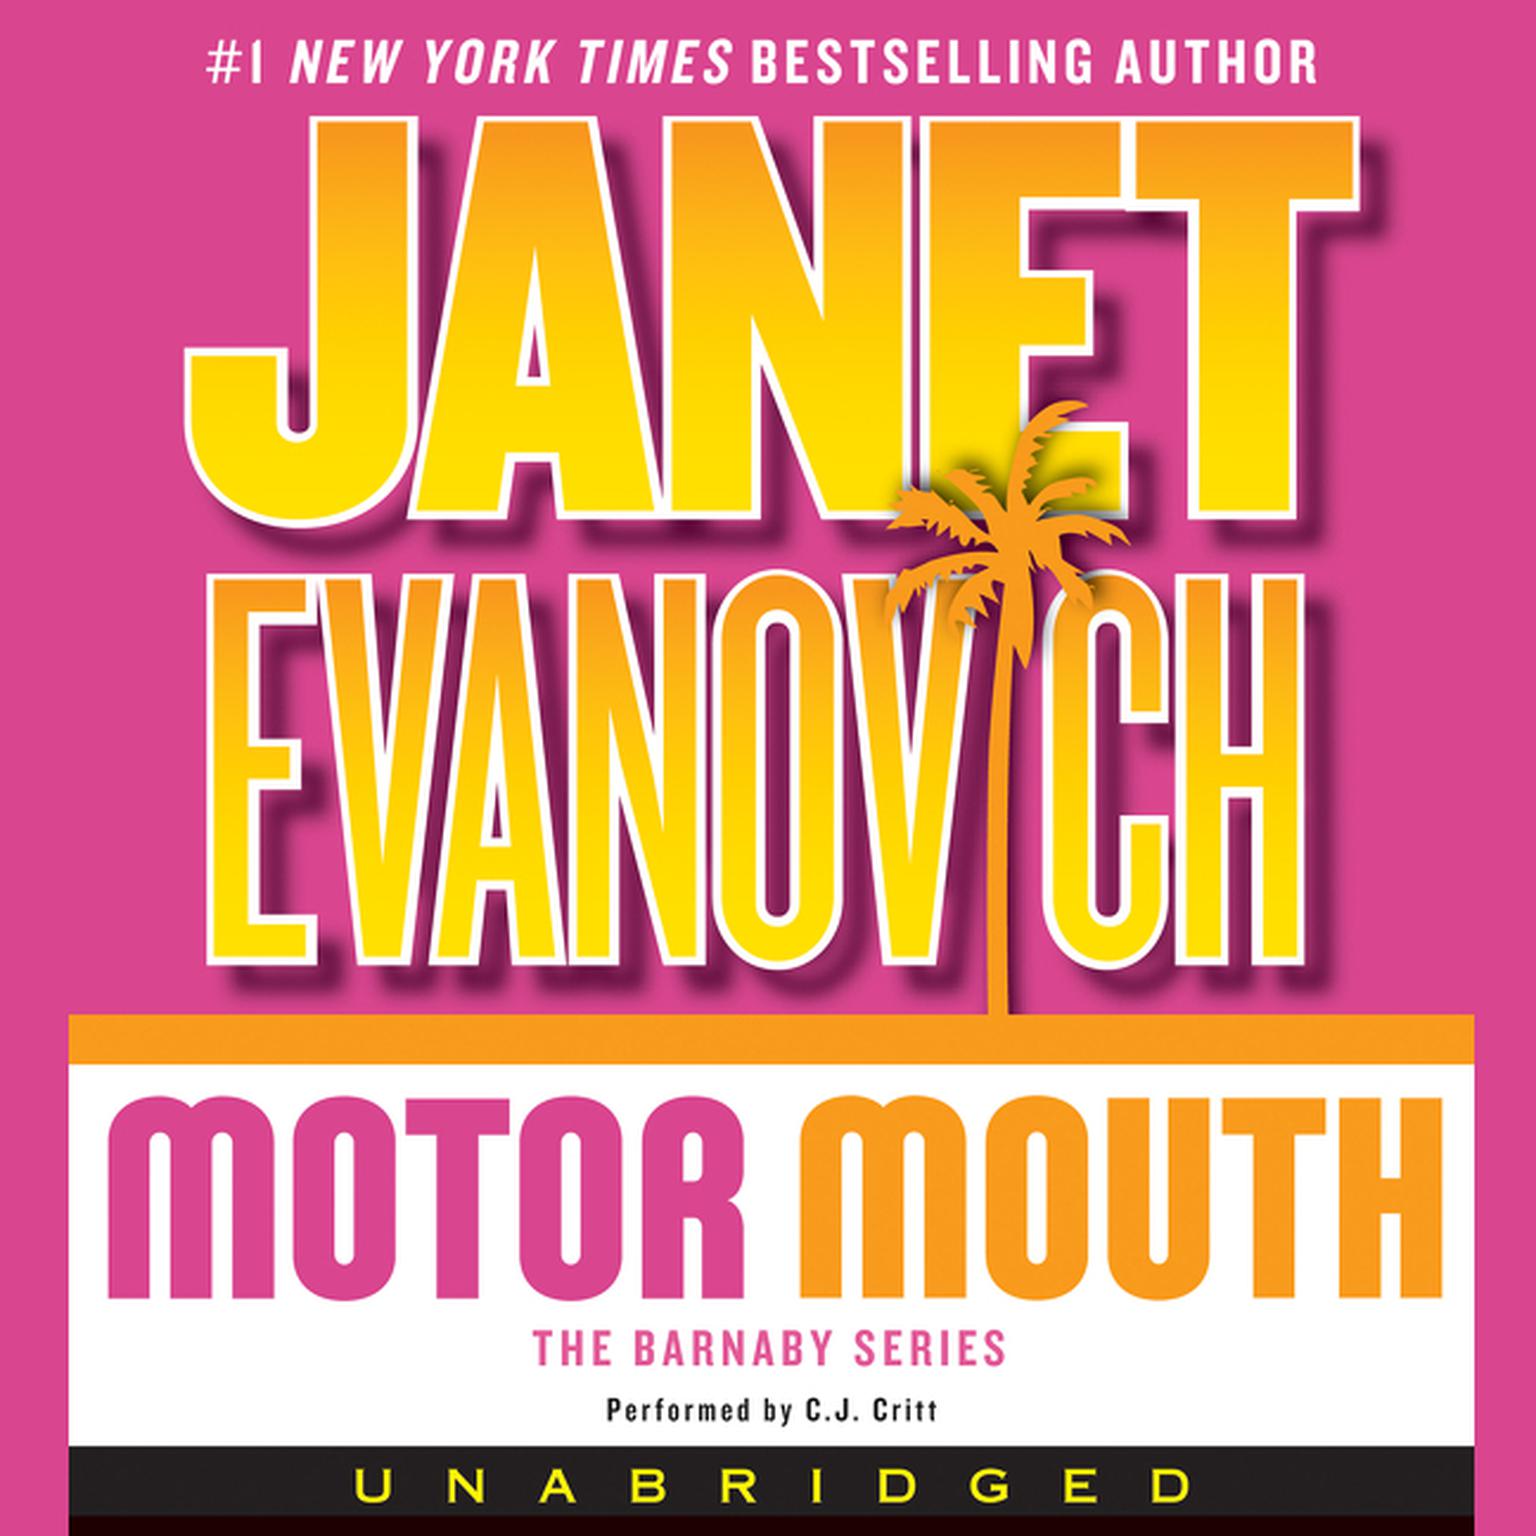 Motor Mouth Audiobook, by Janet Evanovich